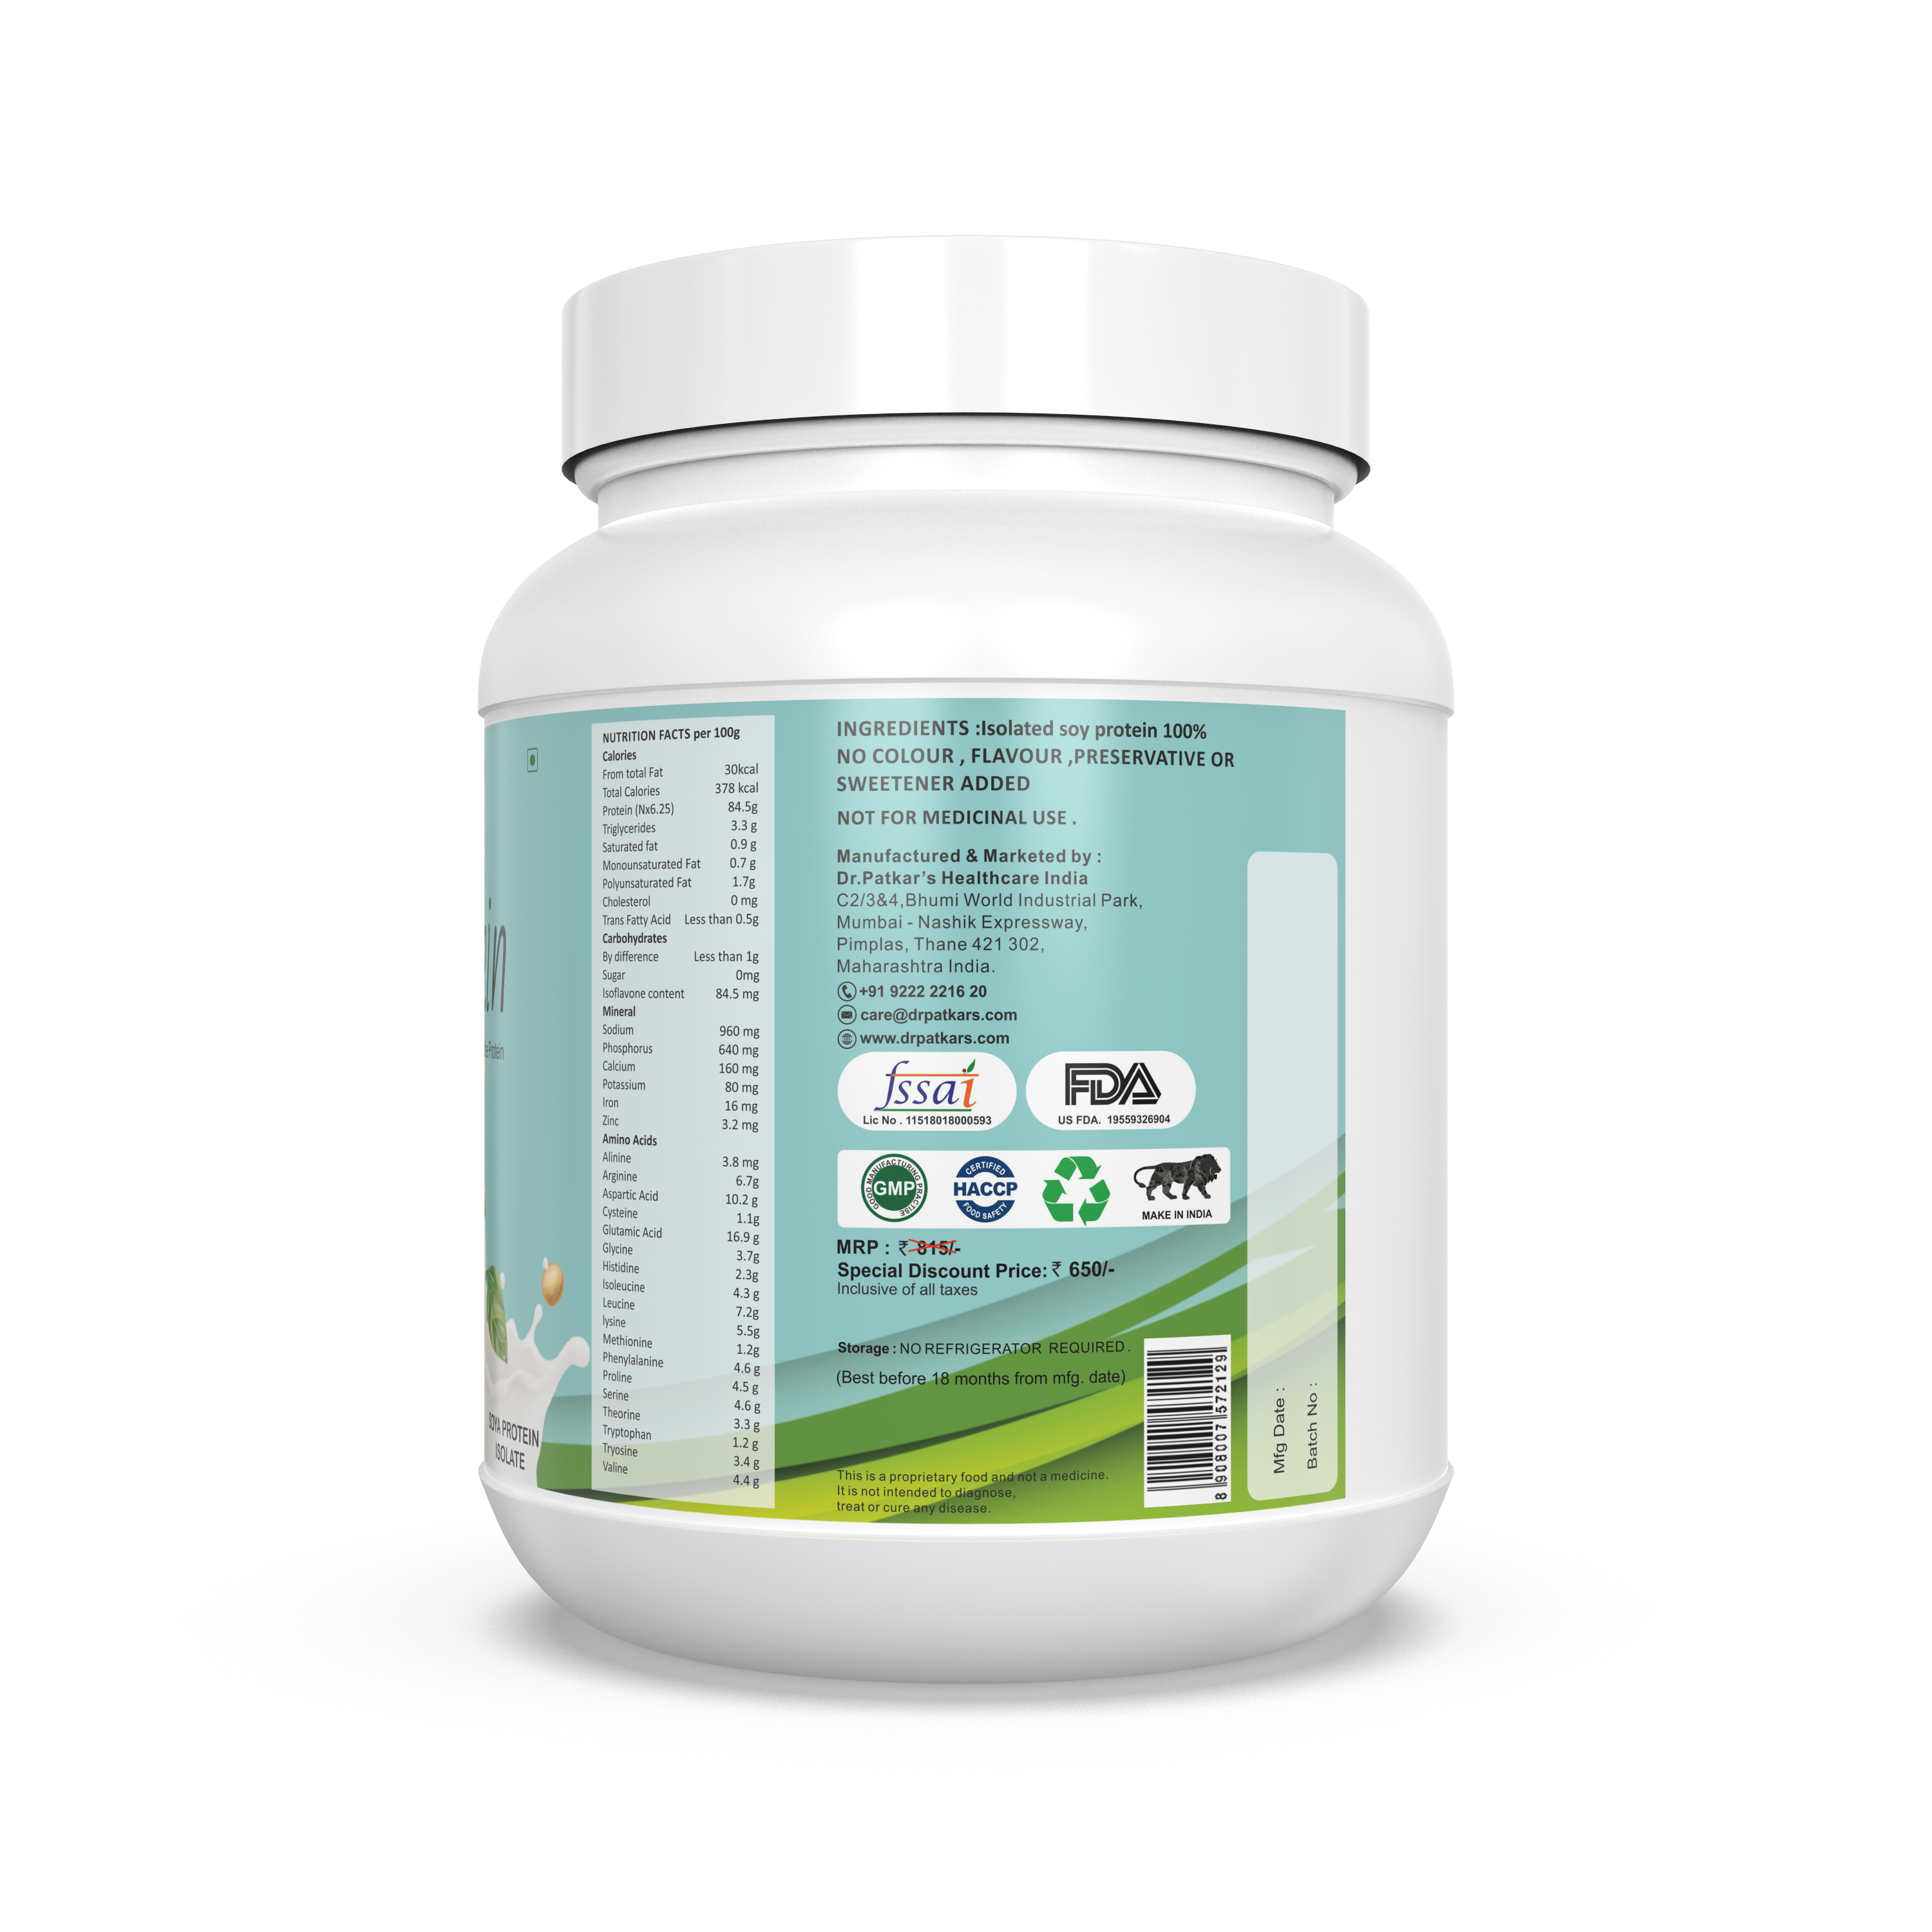 Buy Dr. Patkar's Family Plant Protein at Best Price Online